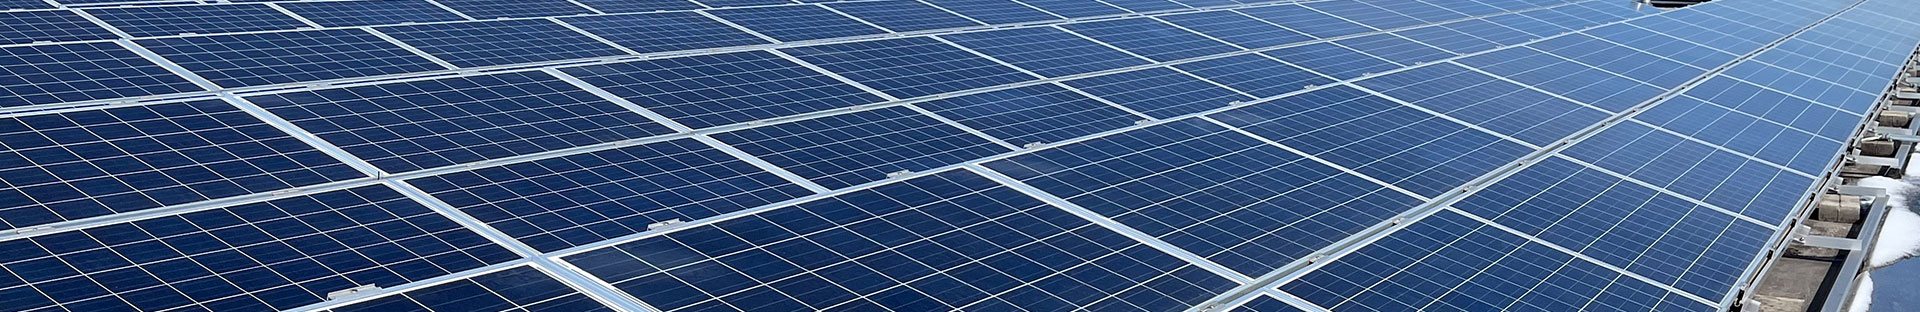 SCEF Purchases Solar Asset in North York, Ontario